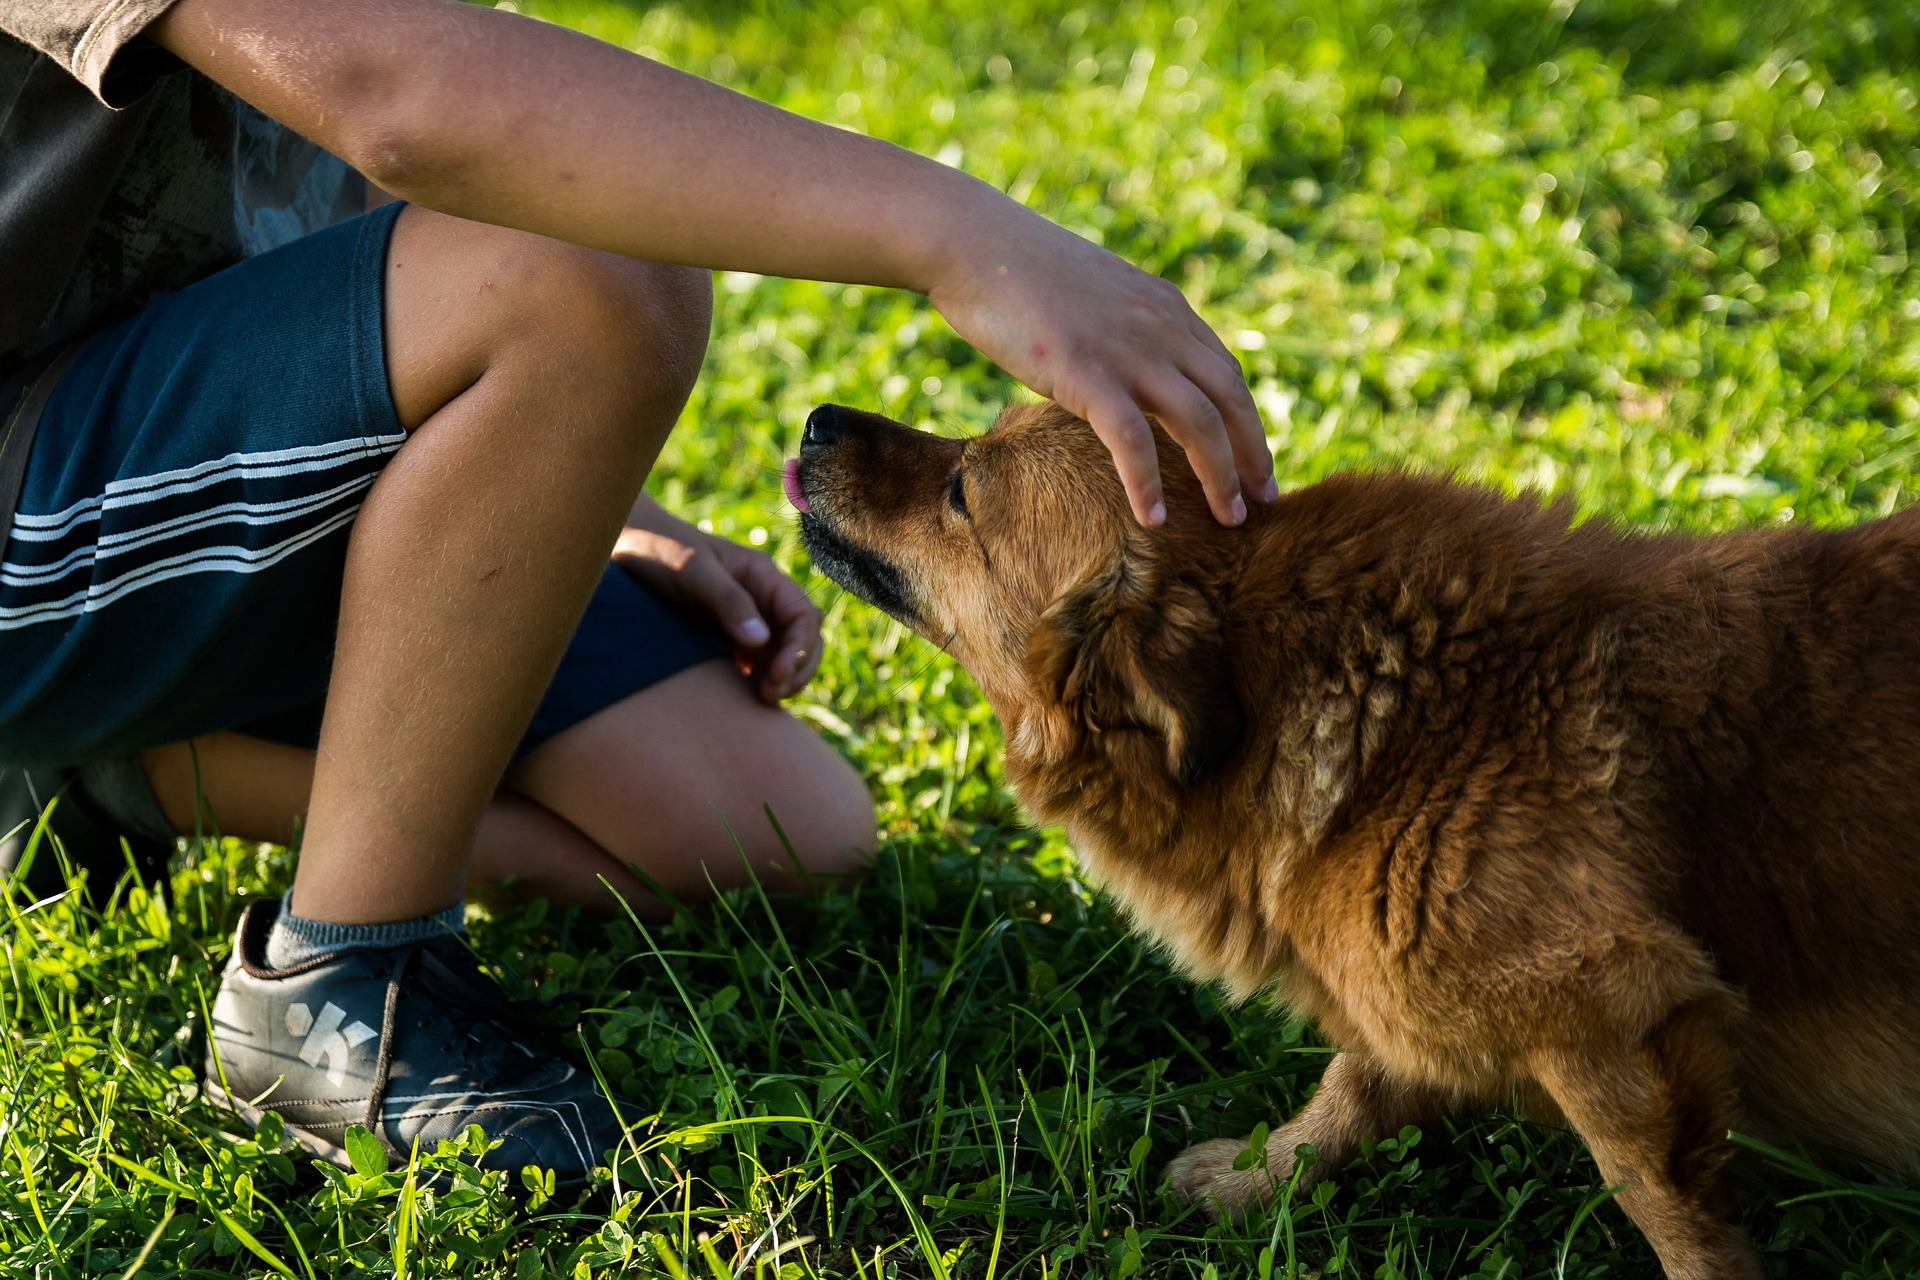 How to Avoid Dog Bite Injuries with Small Children